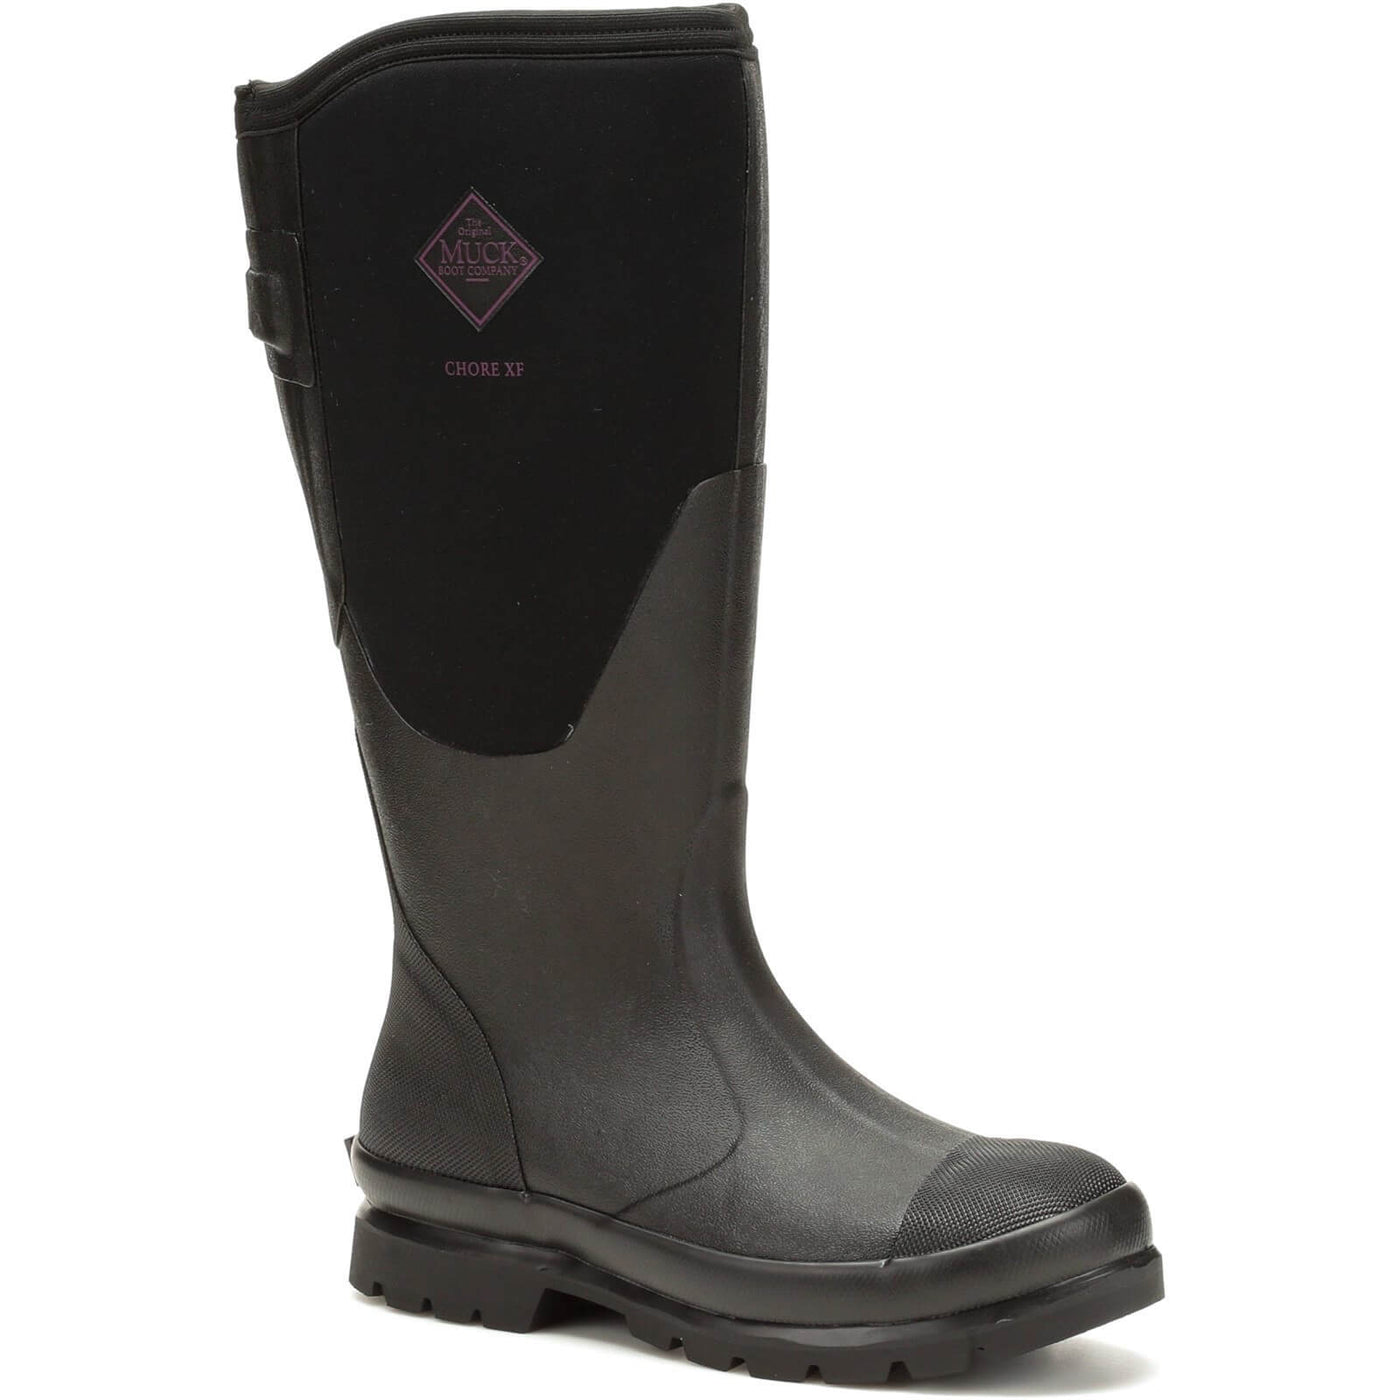 Muck Boots Chore Adjustable Slip On Tall Boots Black 1#colour_black